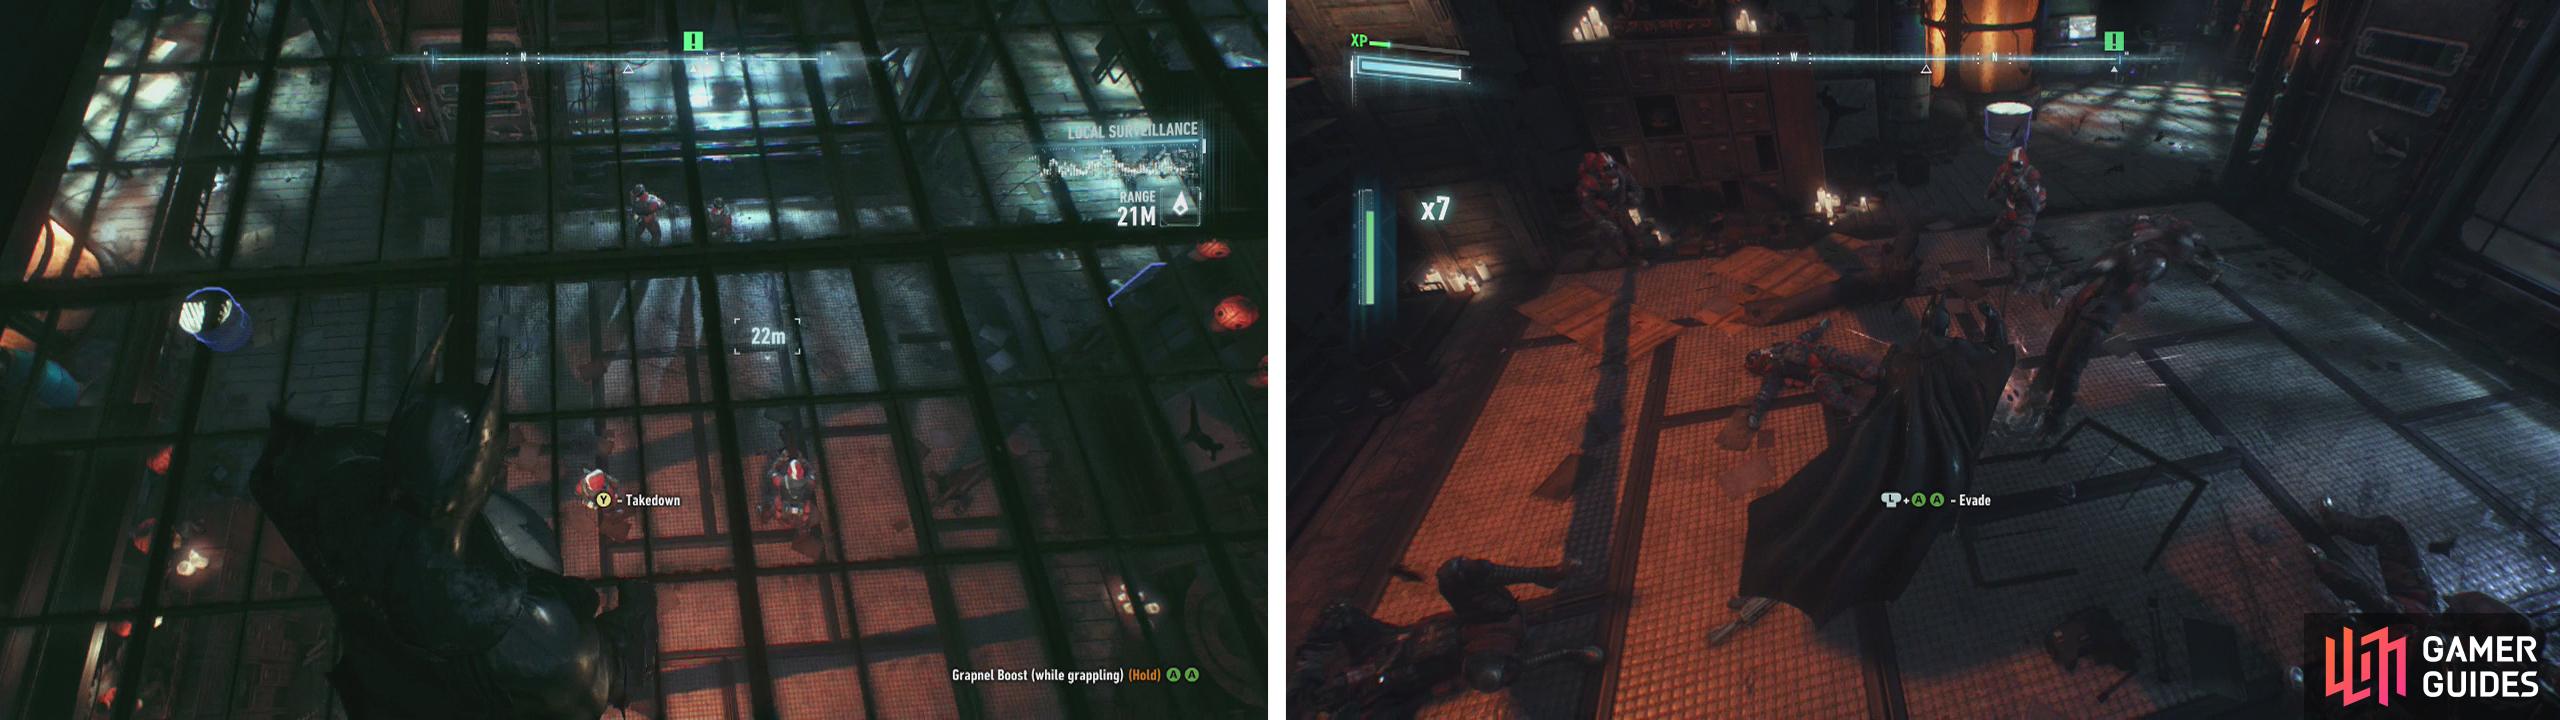 From the skylight use a Takedown on one of the enemies below (left) and then clear out the other Thugs in the room (right).